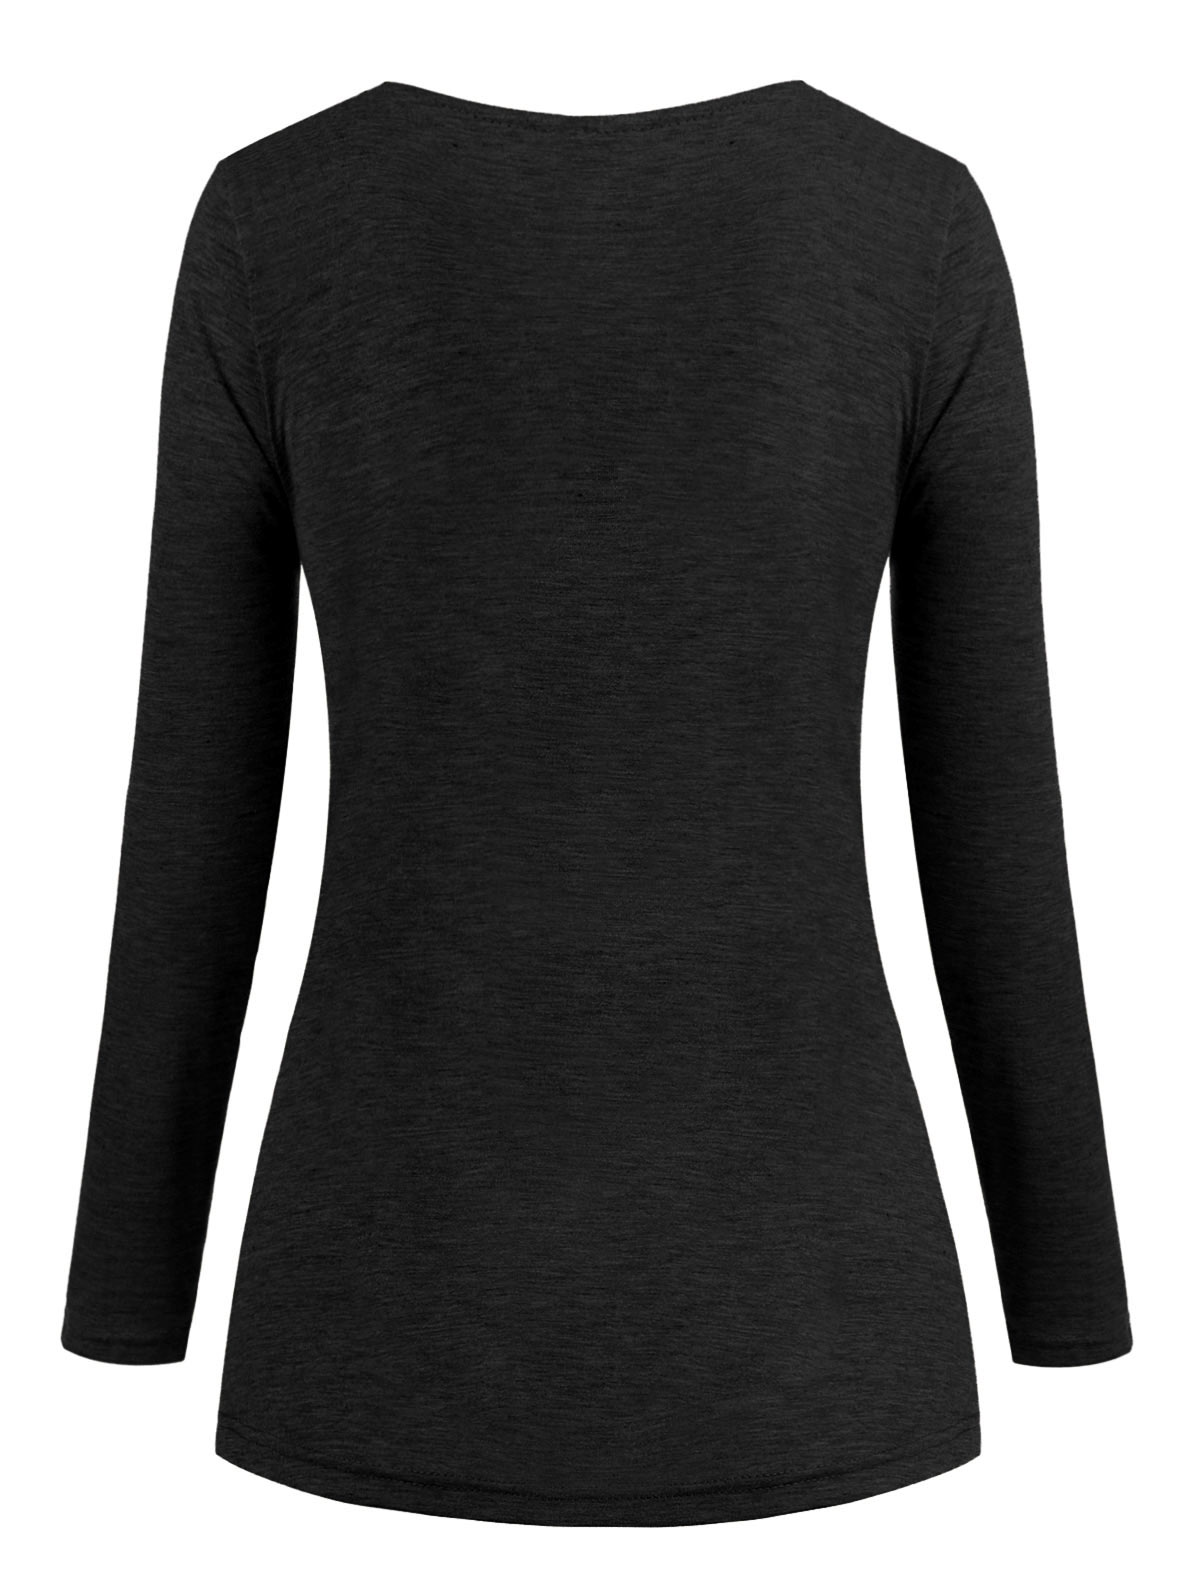 Cowl Neck Mock Button Long Sleeve Marled Top